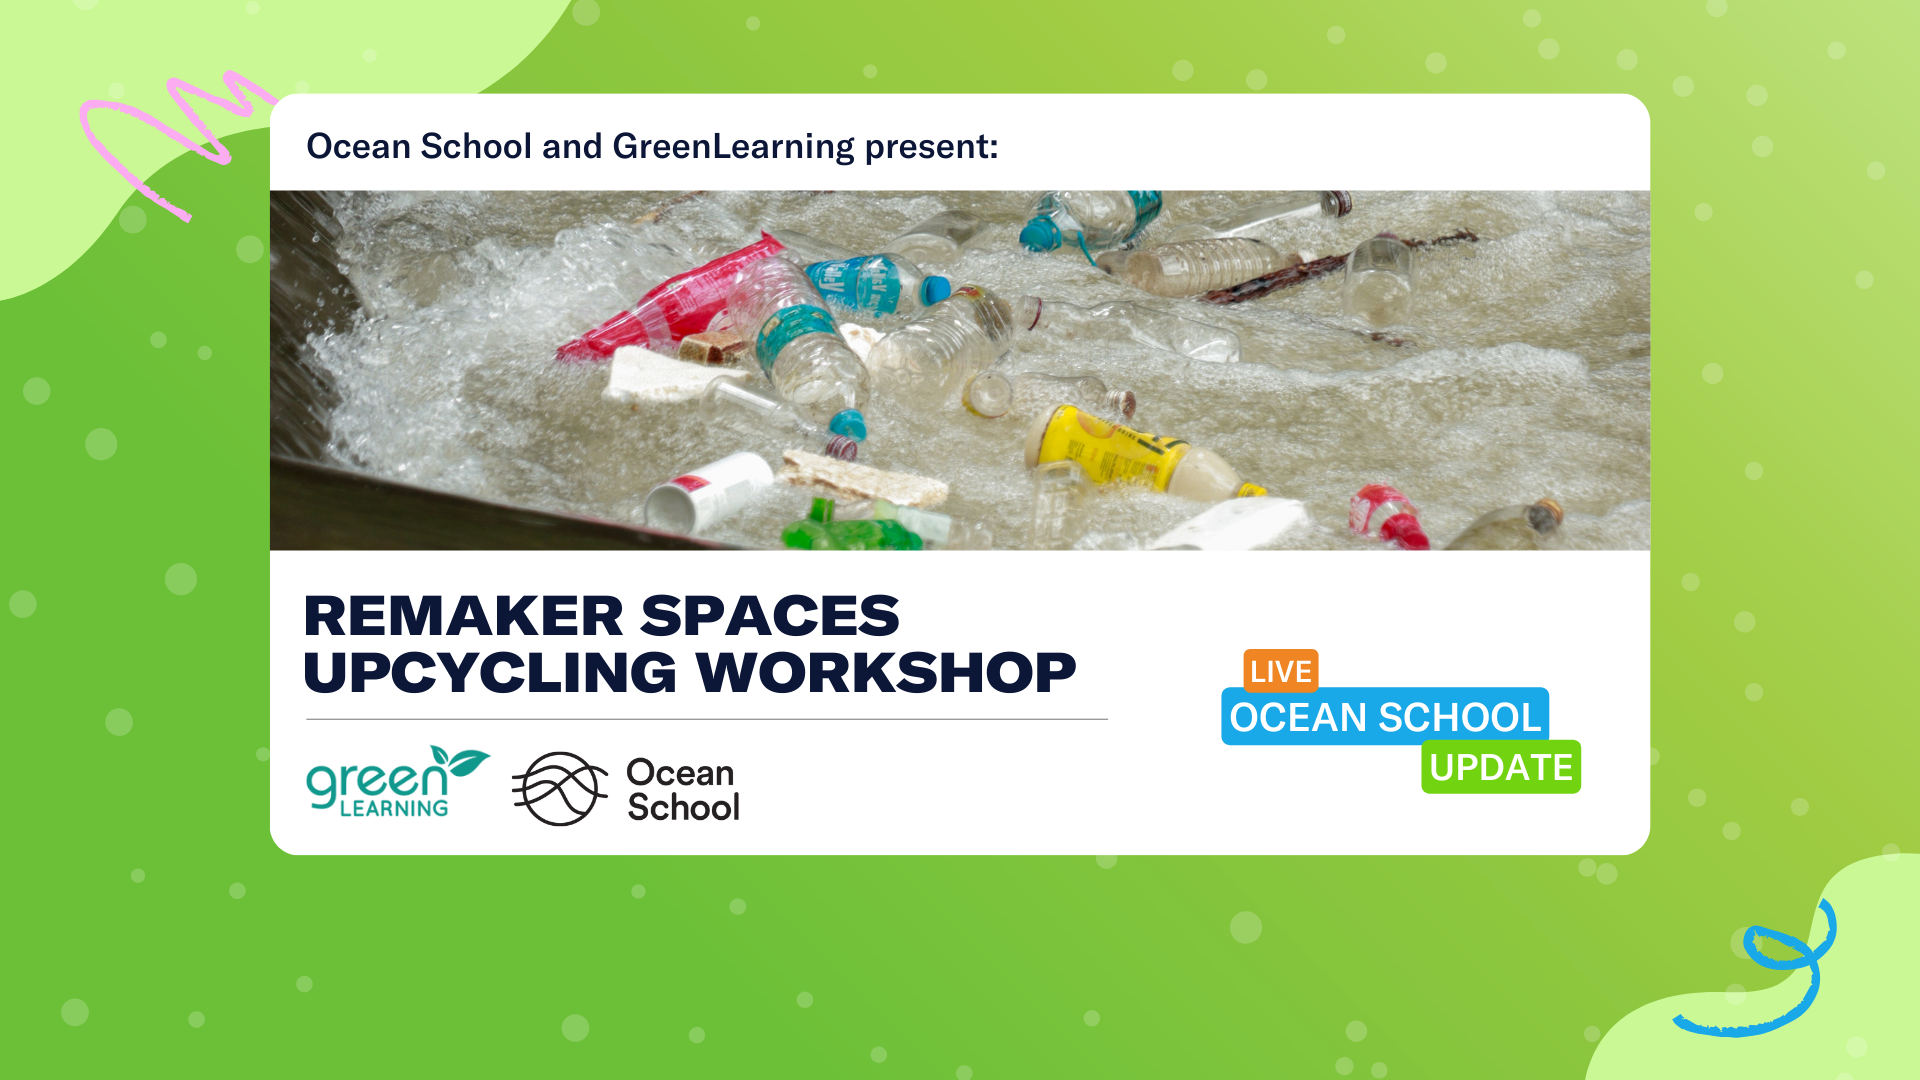 Plastic bottles and garbage floating in water. Text reads: “Ocean School and GreenLearning present: Remaker Spaces Upcycling Workshop.” Logos for Ocean School and GreenLearning are in the background.